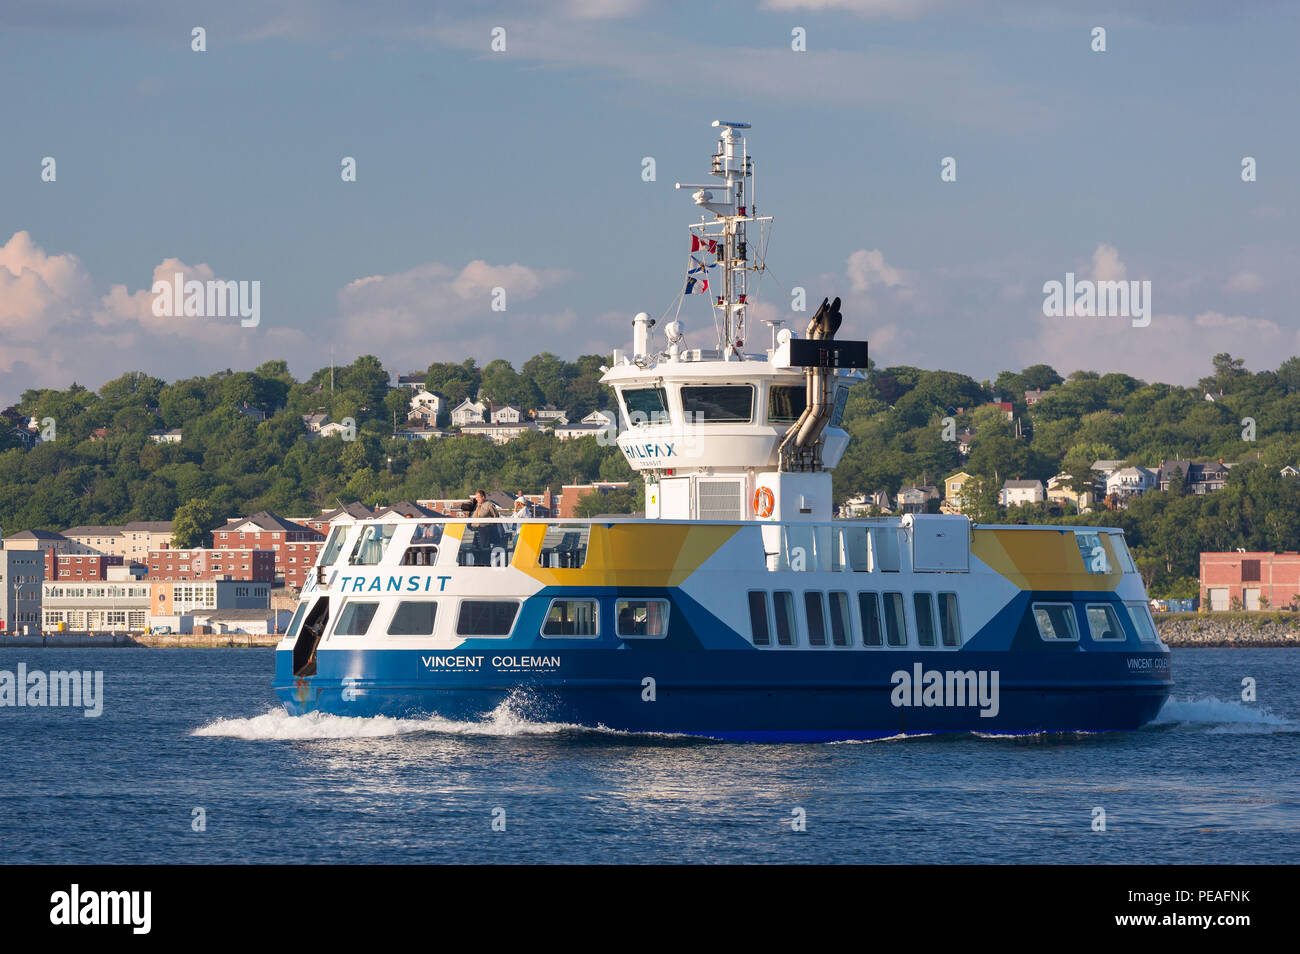 HALIFAX, NOVA SCOTIA, CANADA - Woodside Ferry boat, named Vincent Coleman,  in harbor Stock Photo - Alamy